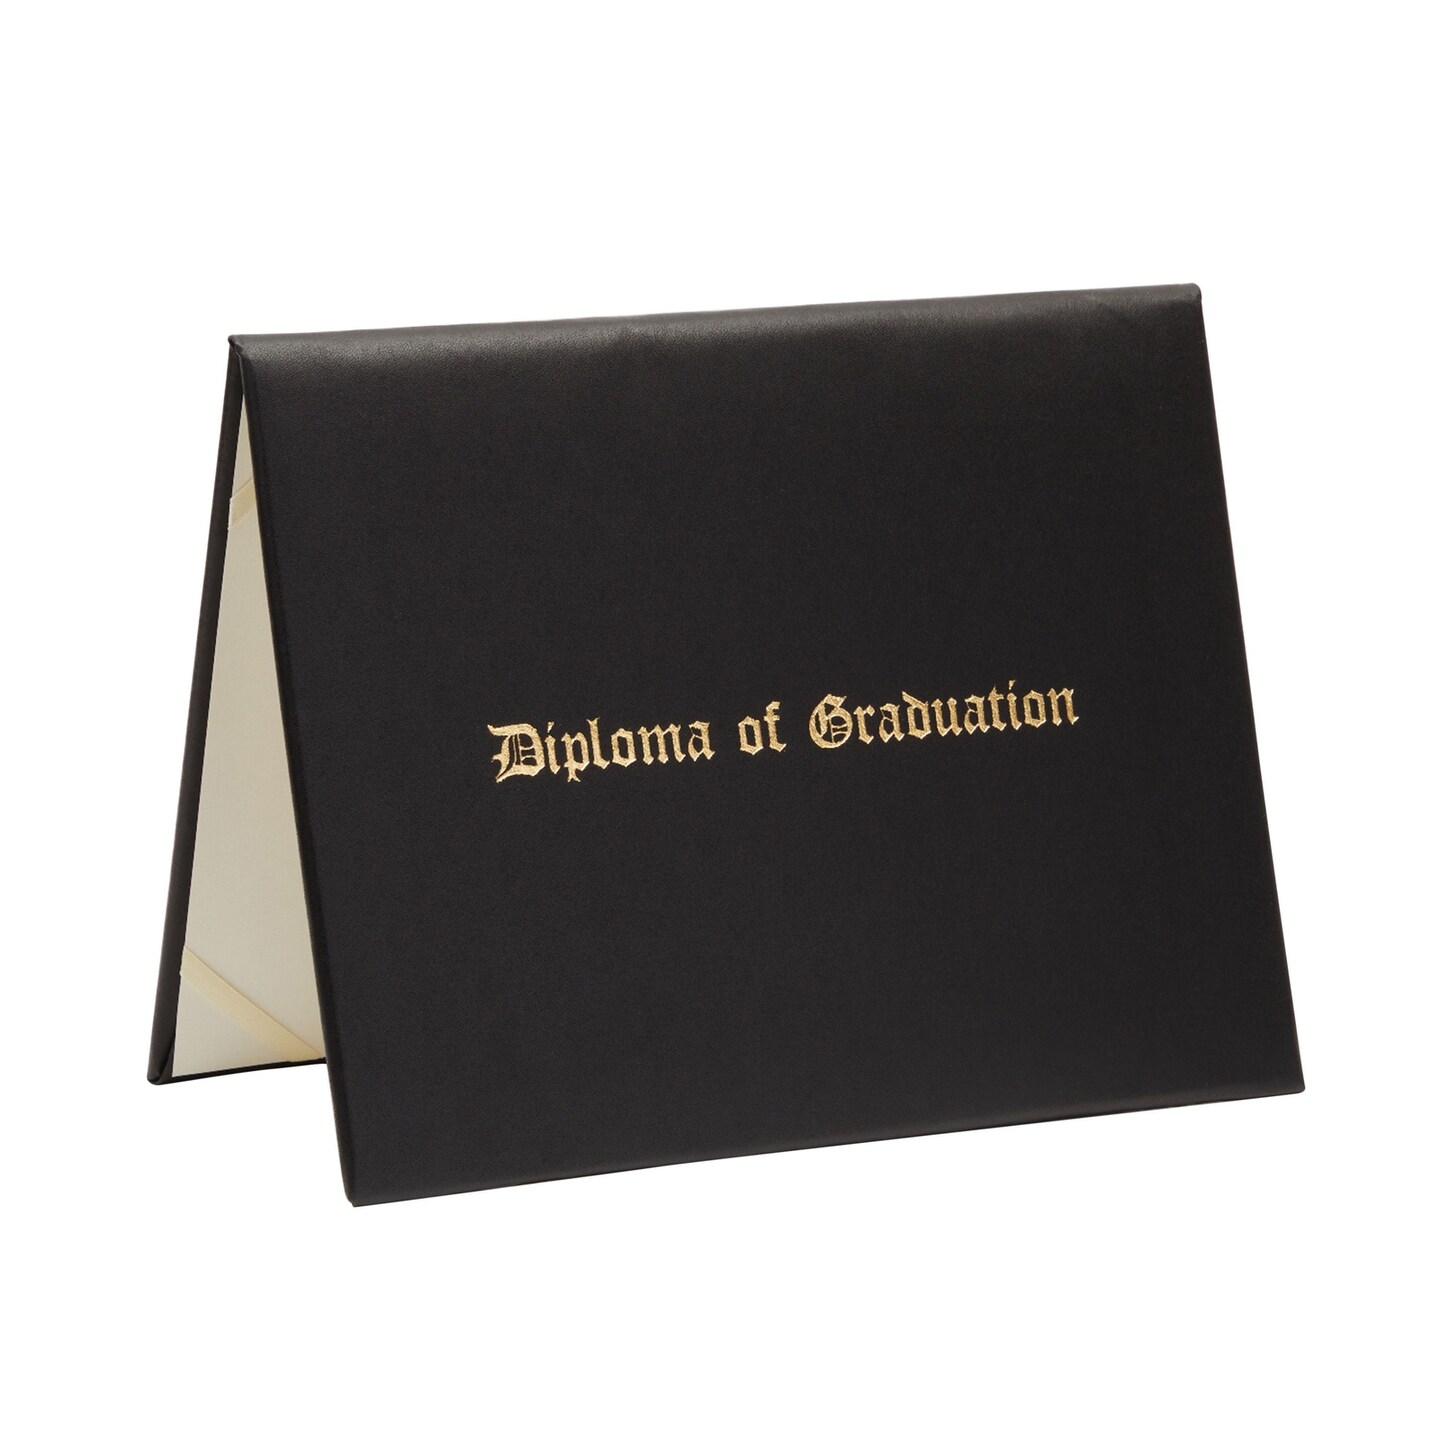 Black Certificate Holder for Graduation, Diploma Cover (11.5 x 9 In)